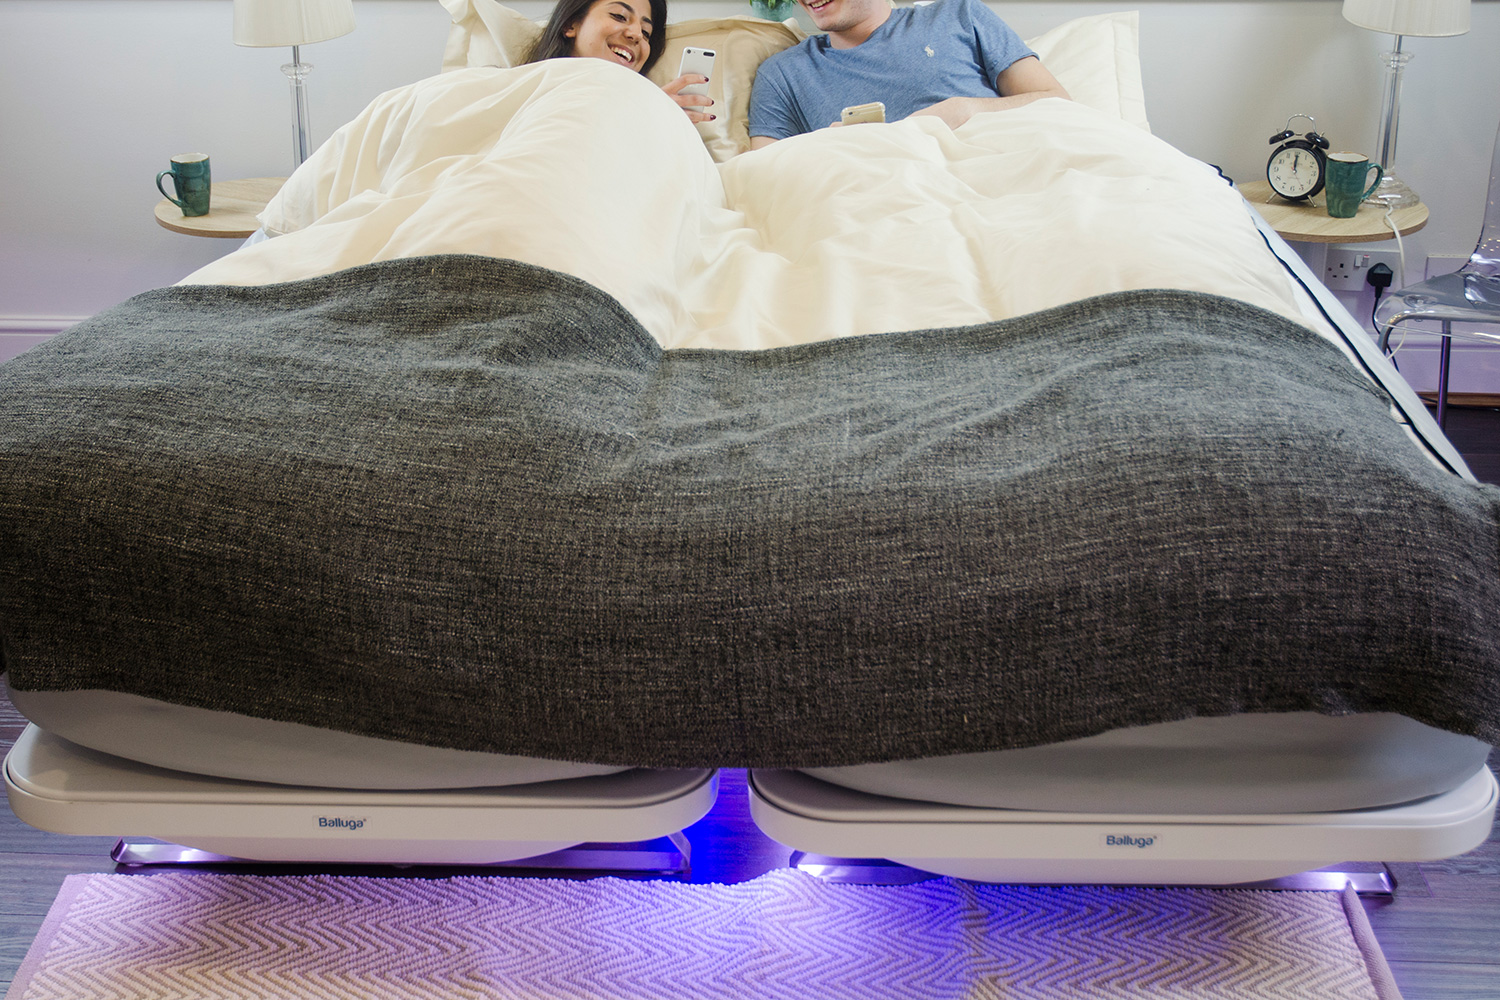 balluga is a smart bed with ac and air suspension underbed lighting